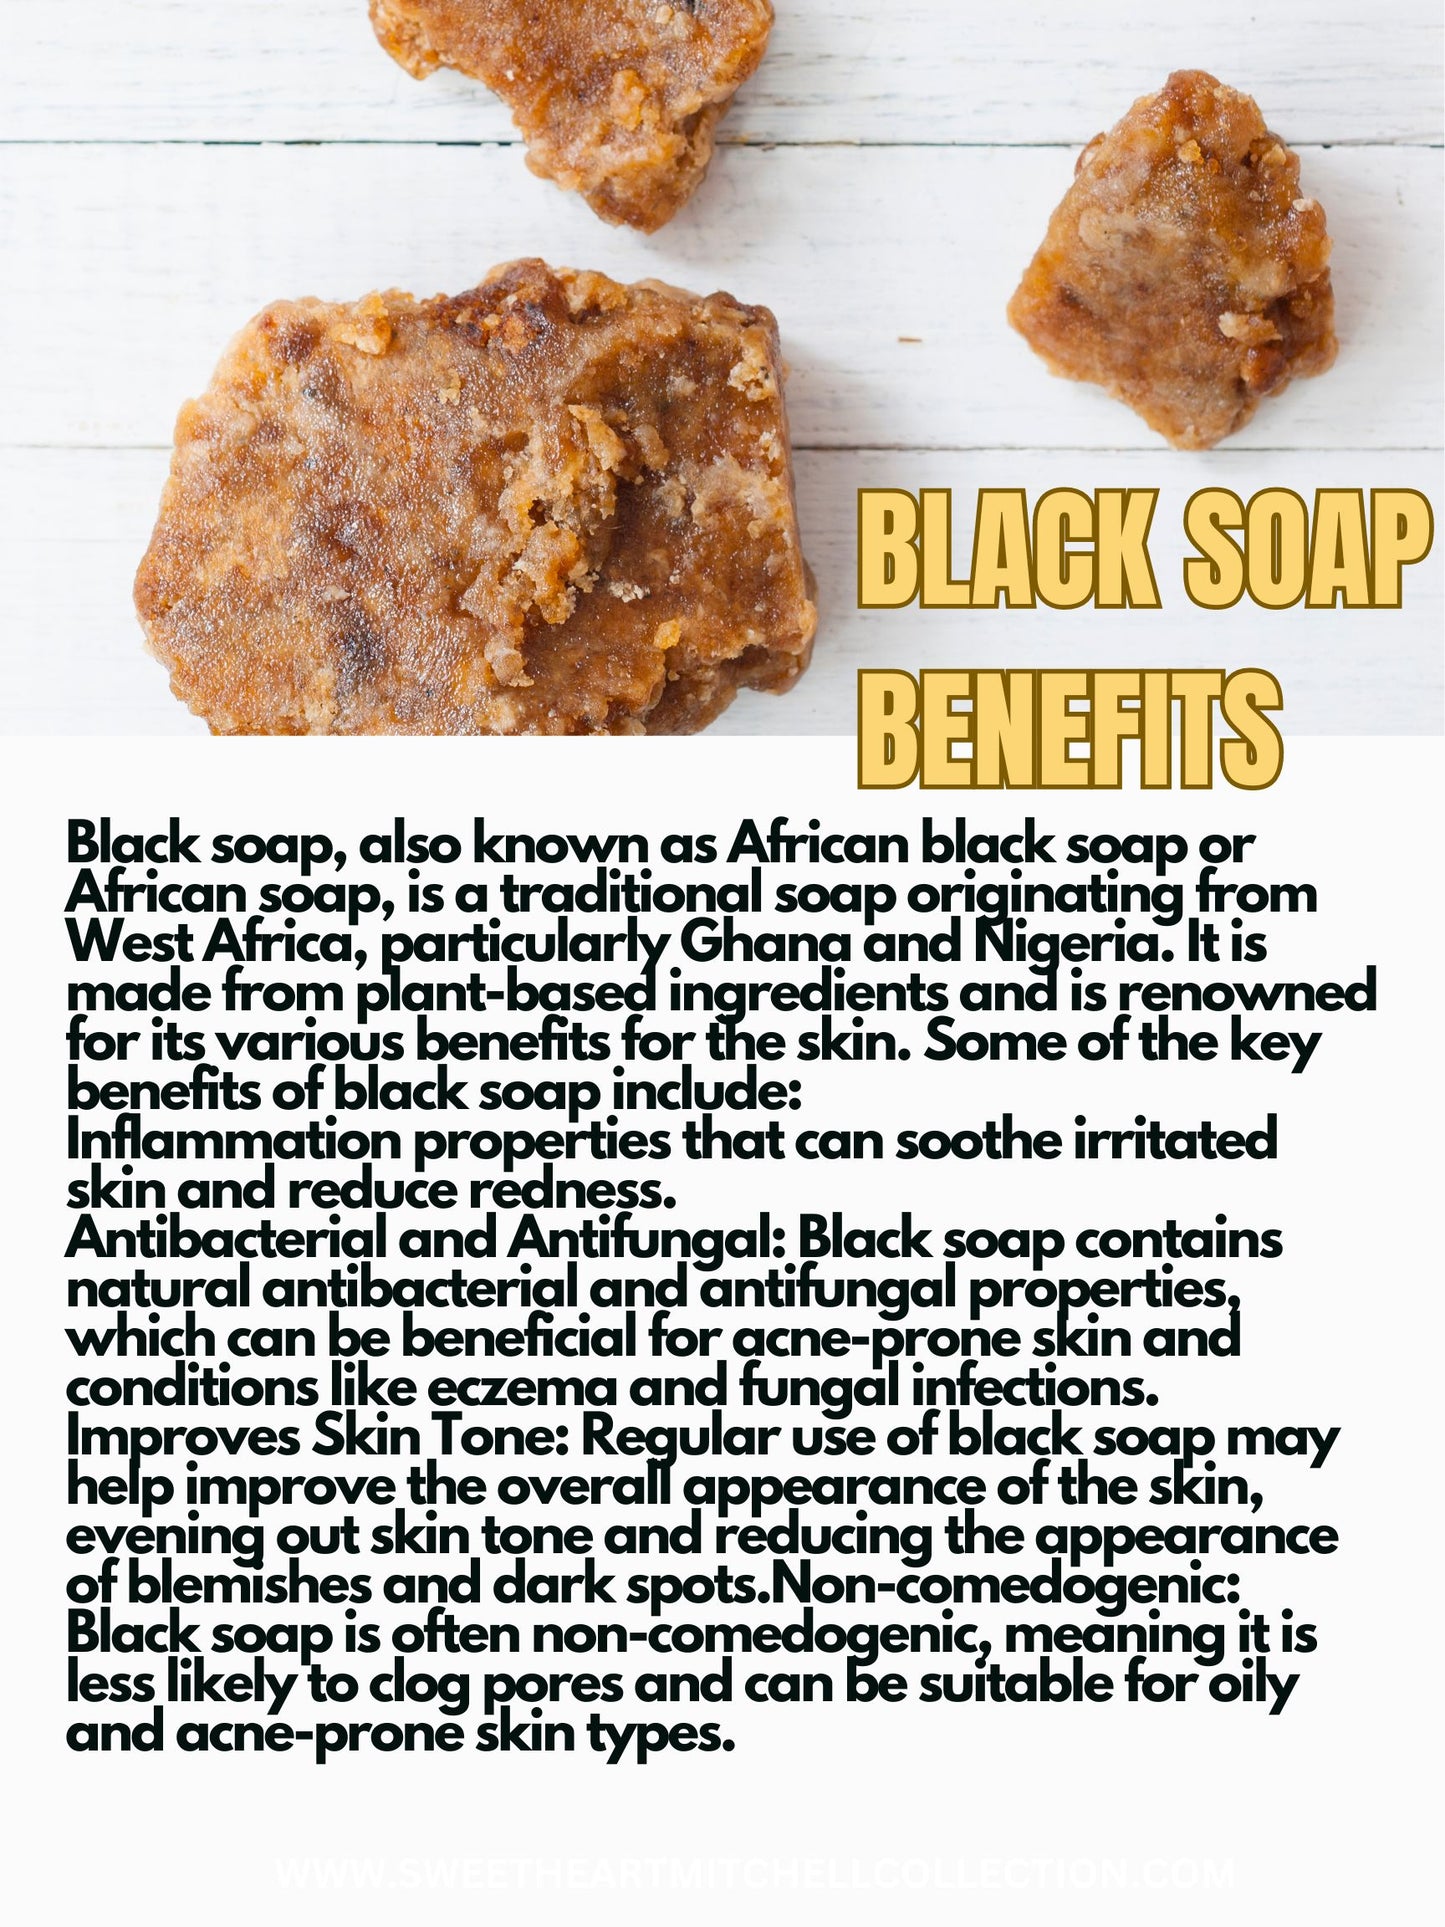 Black Soap Shower Gel infused with Sea Moss & Shea butter